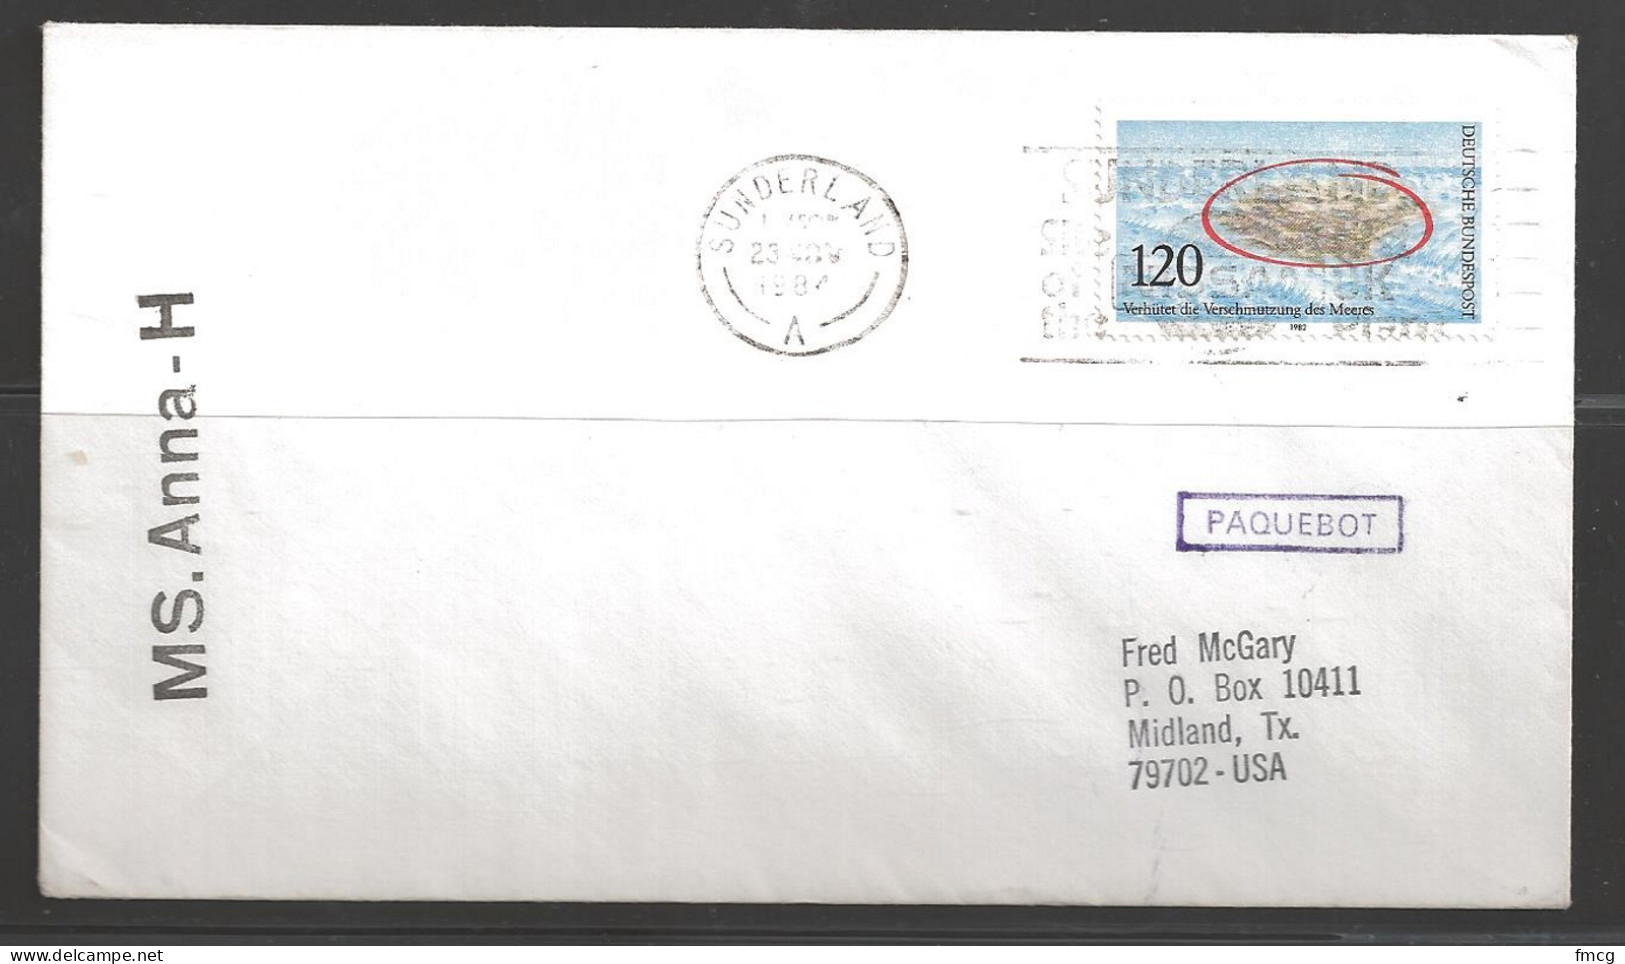 1984 Paquebot Cover, Germany Stamp Used In Sunderland, UK - Covers & Documents